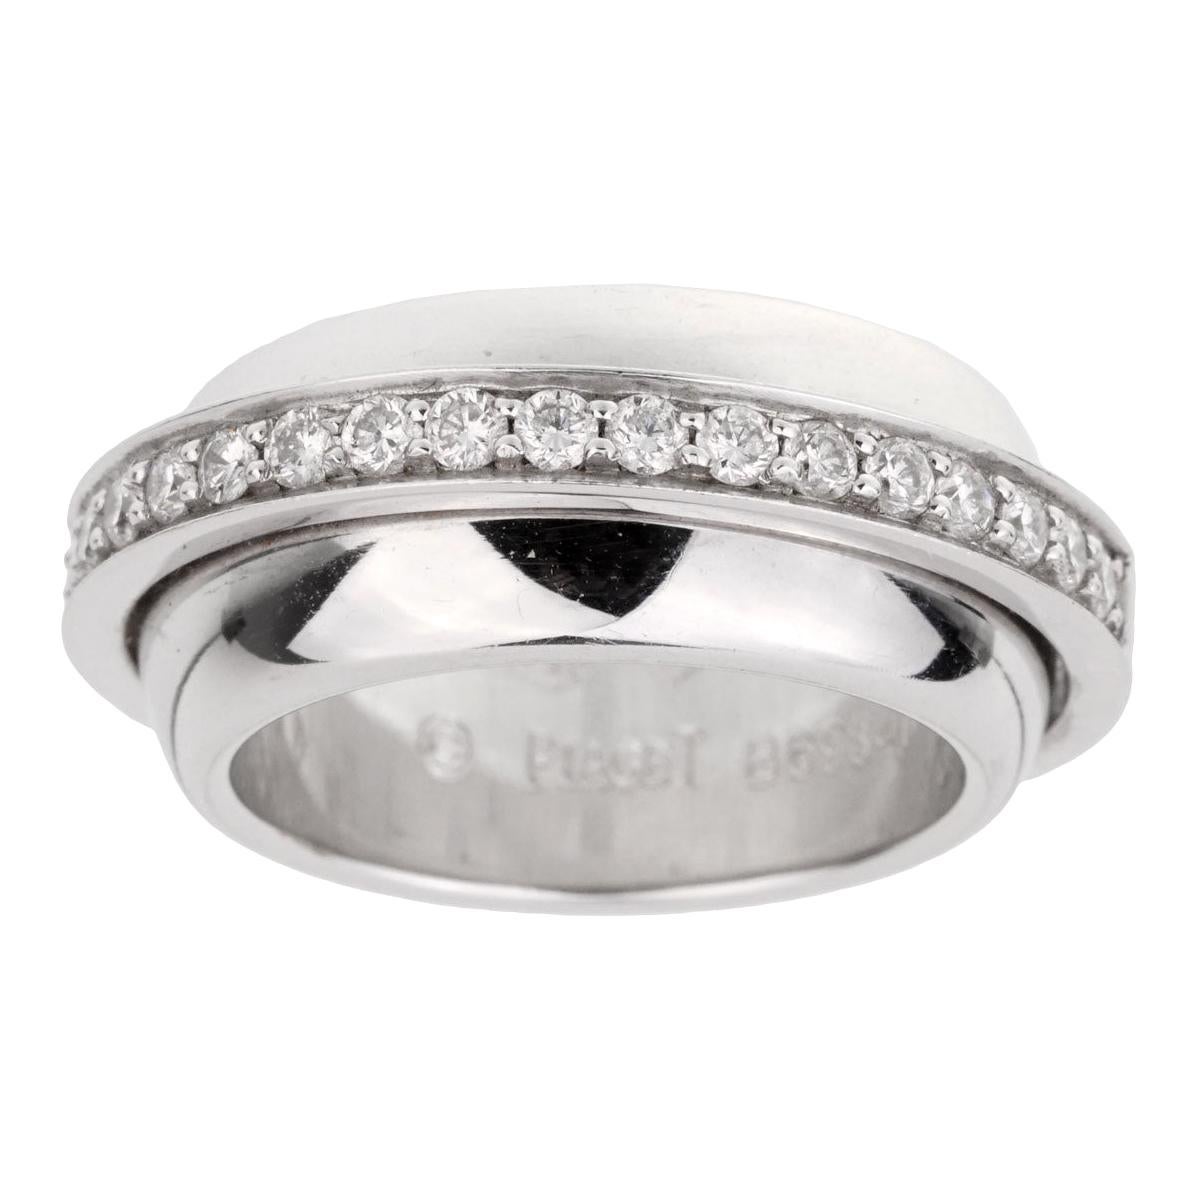 Piaget Possession White Gold Diamond Ring For Sale